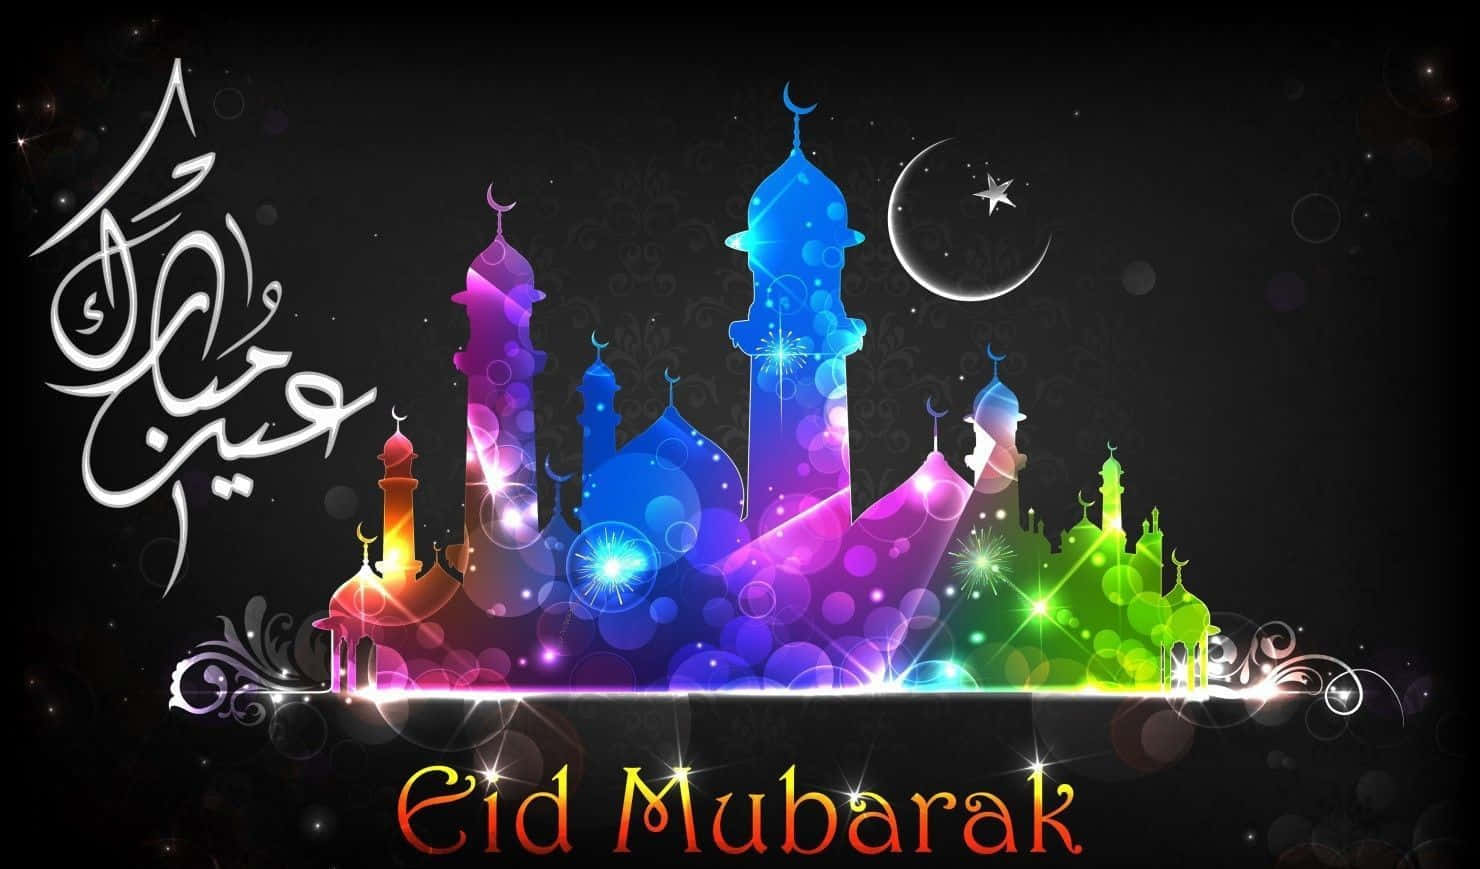 Celebrate the spirit of Eid Mubarak with friends and family